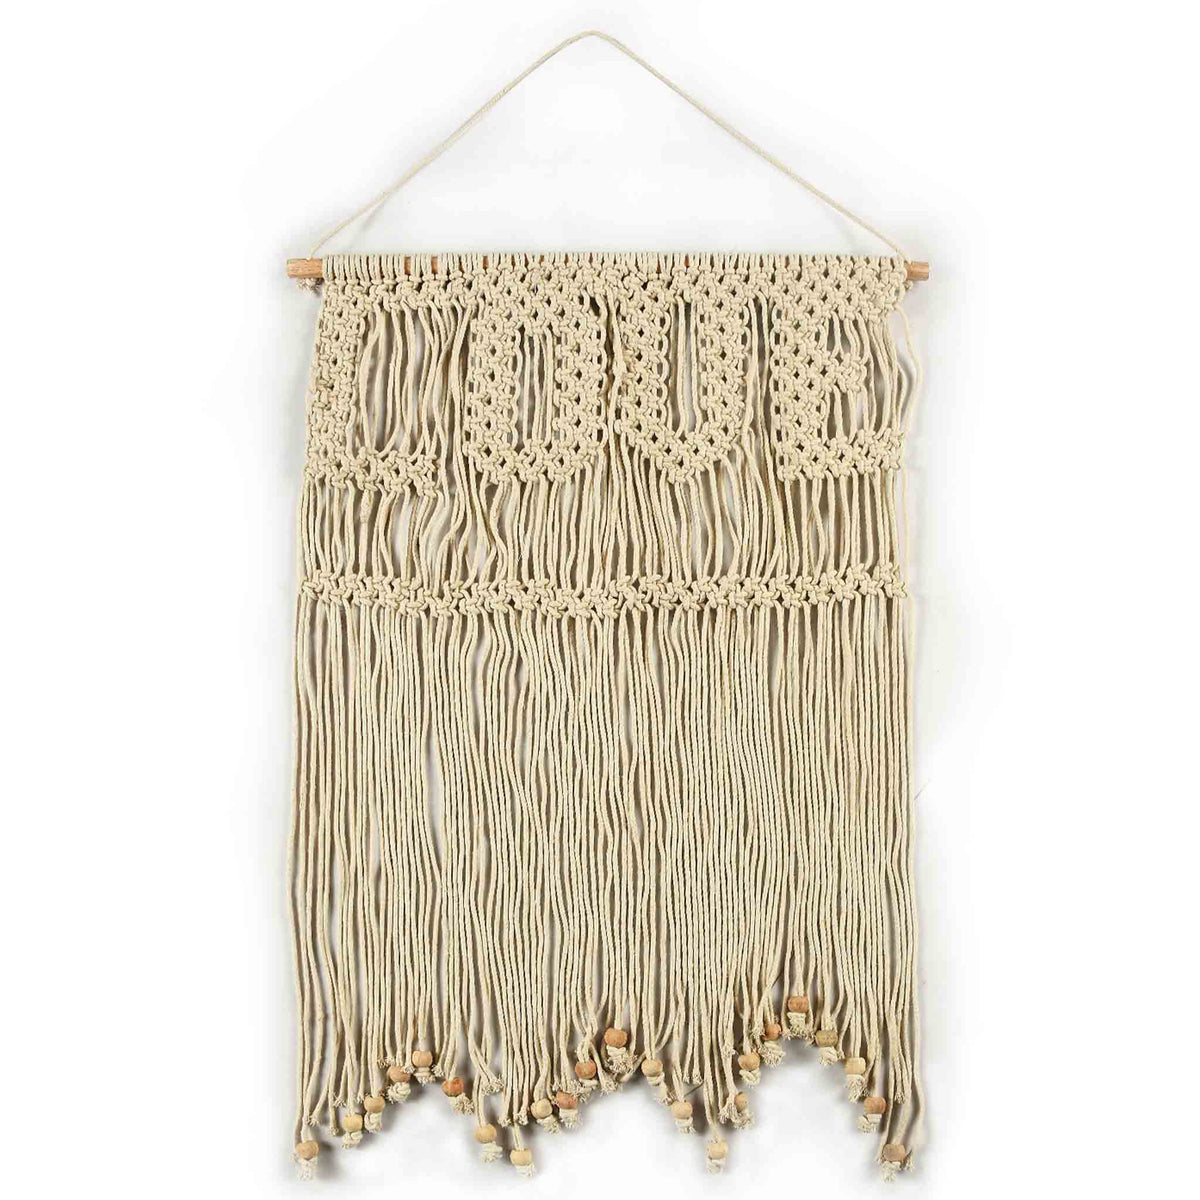 LOVE Wall Hanging with wooden beads